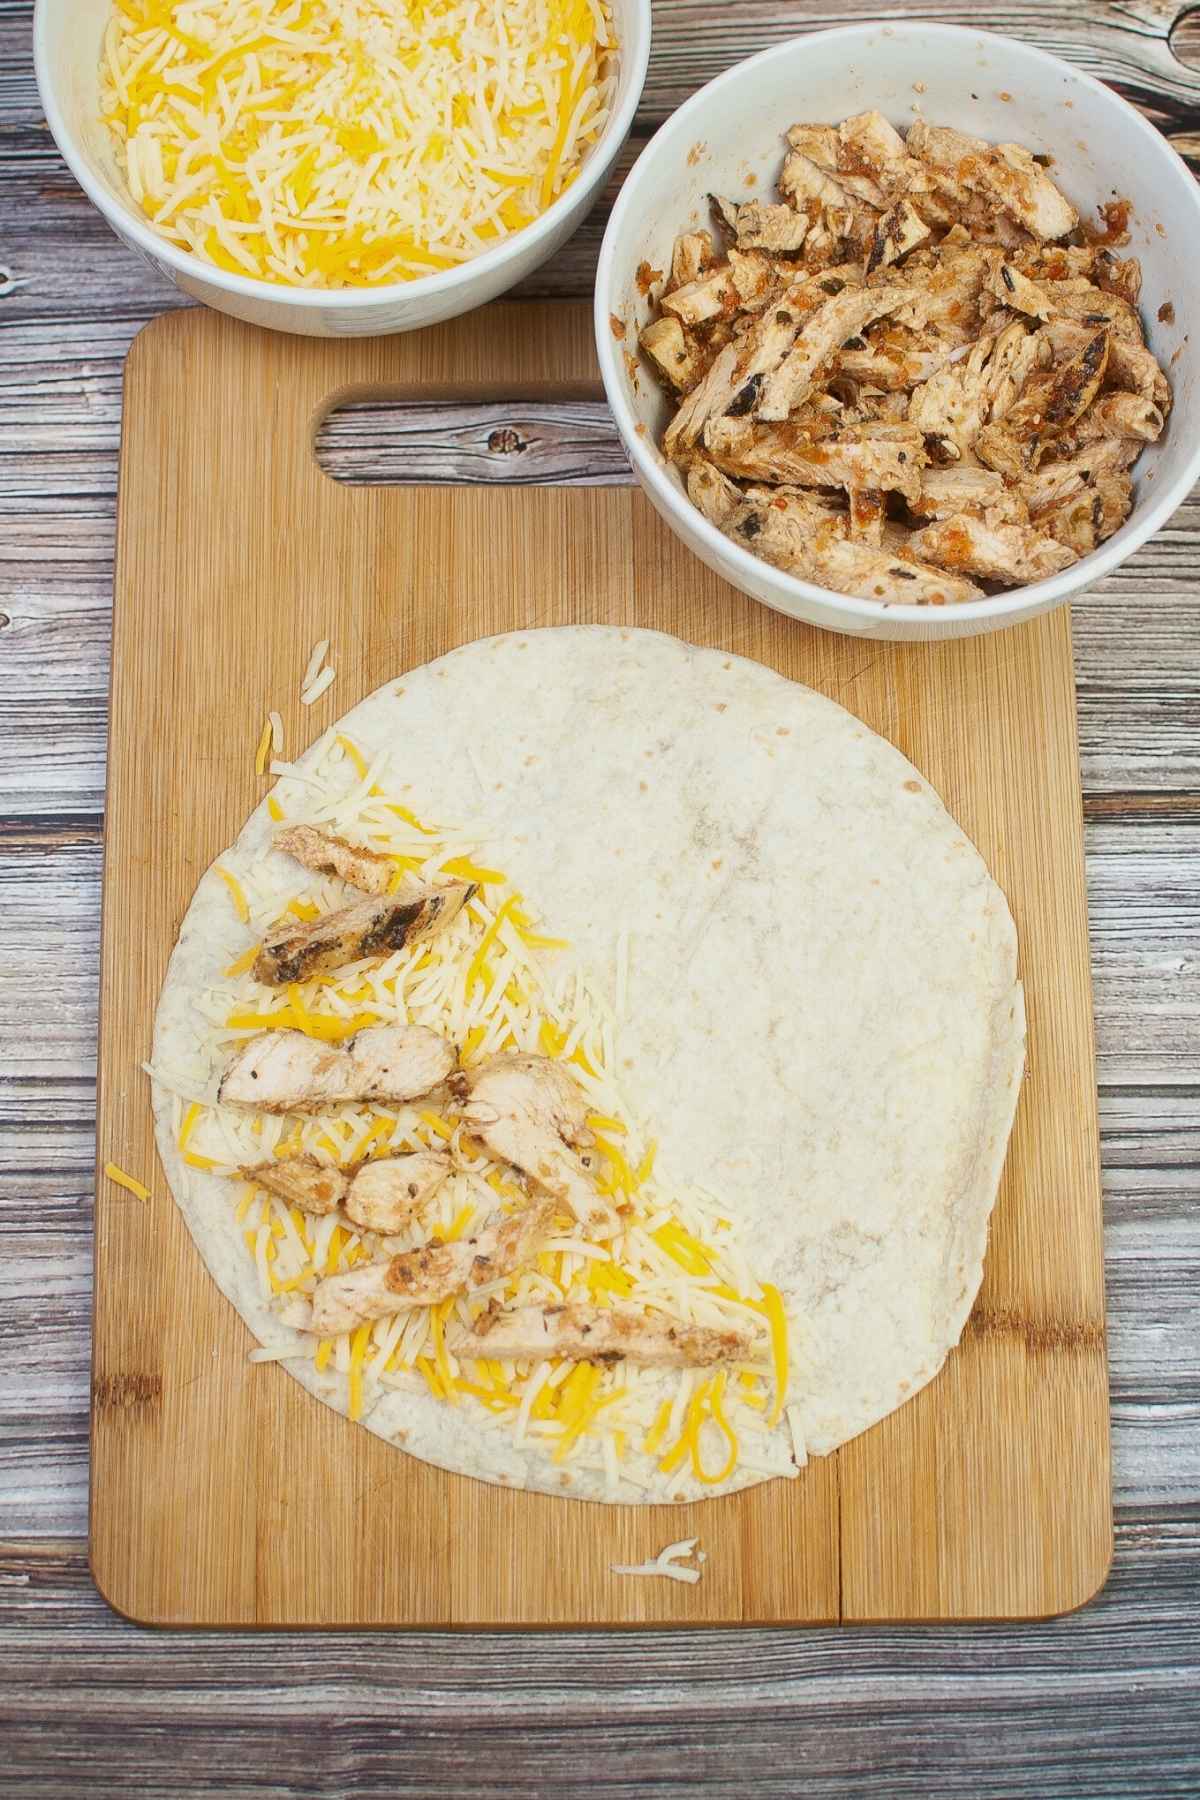 Flour tortilla with cheese and chicken strips on half of the tortilla.